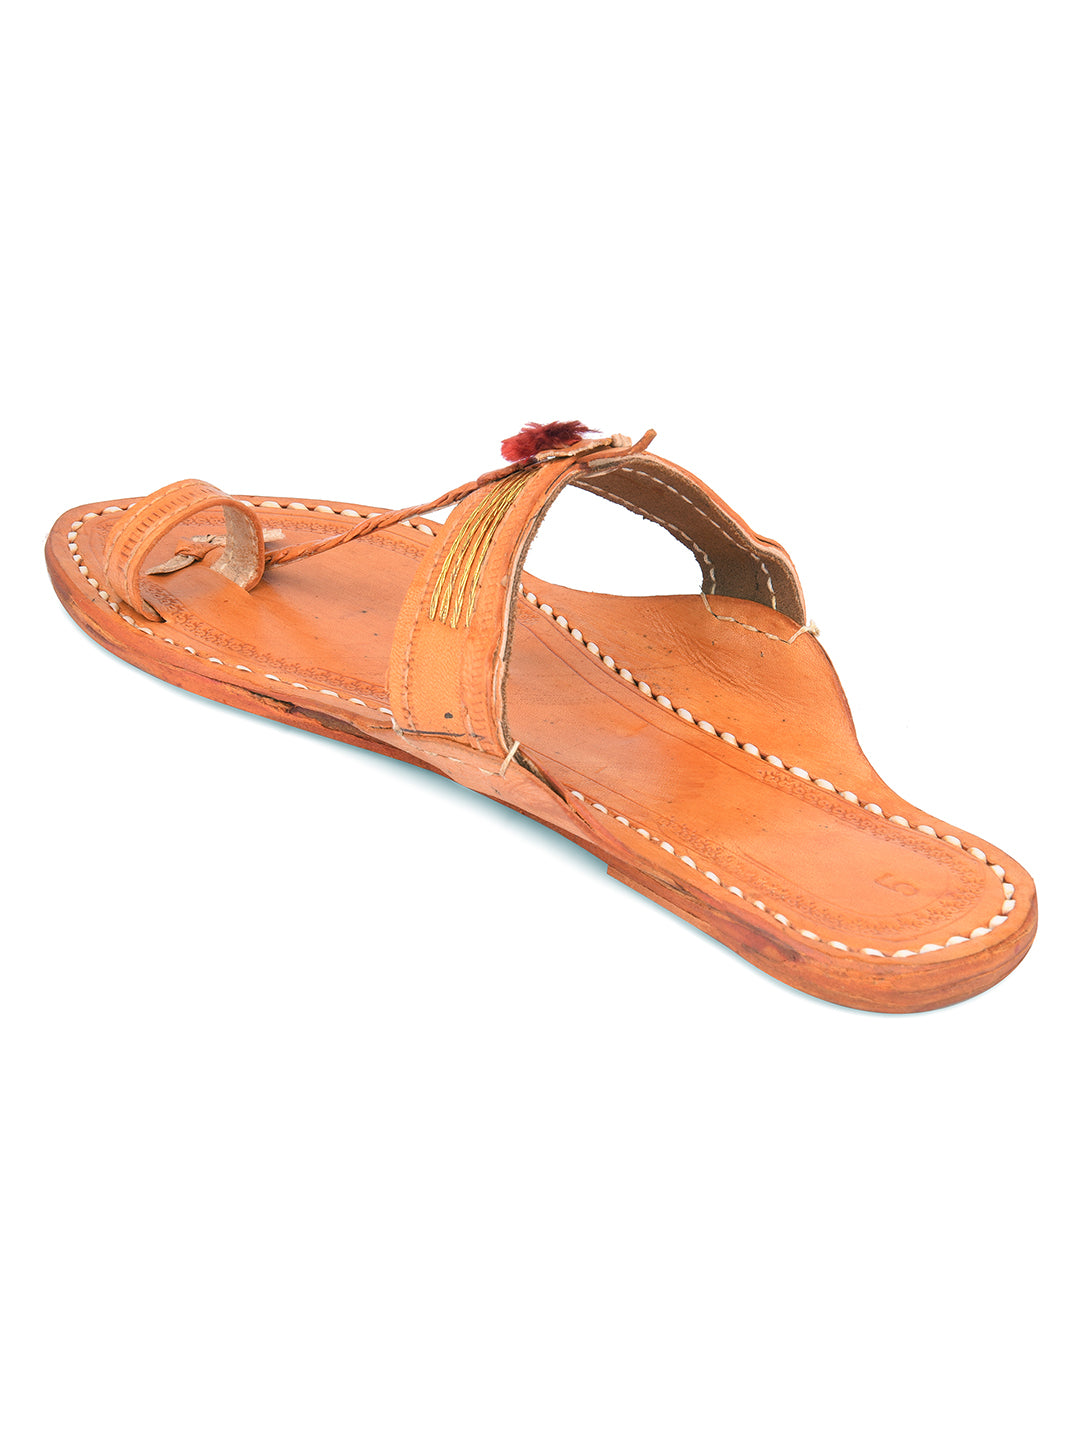 DESI COLOUR Women Tan Brown Textured Leather Ethnic One Toe Flats